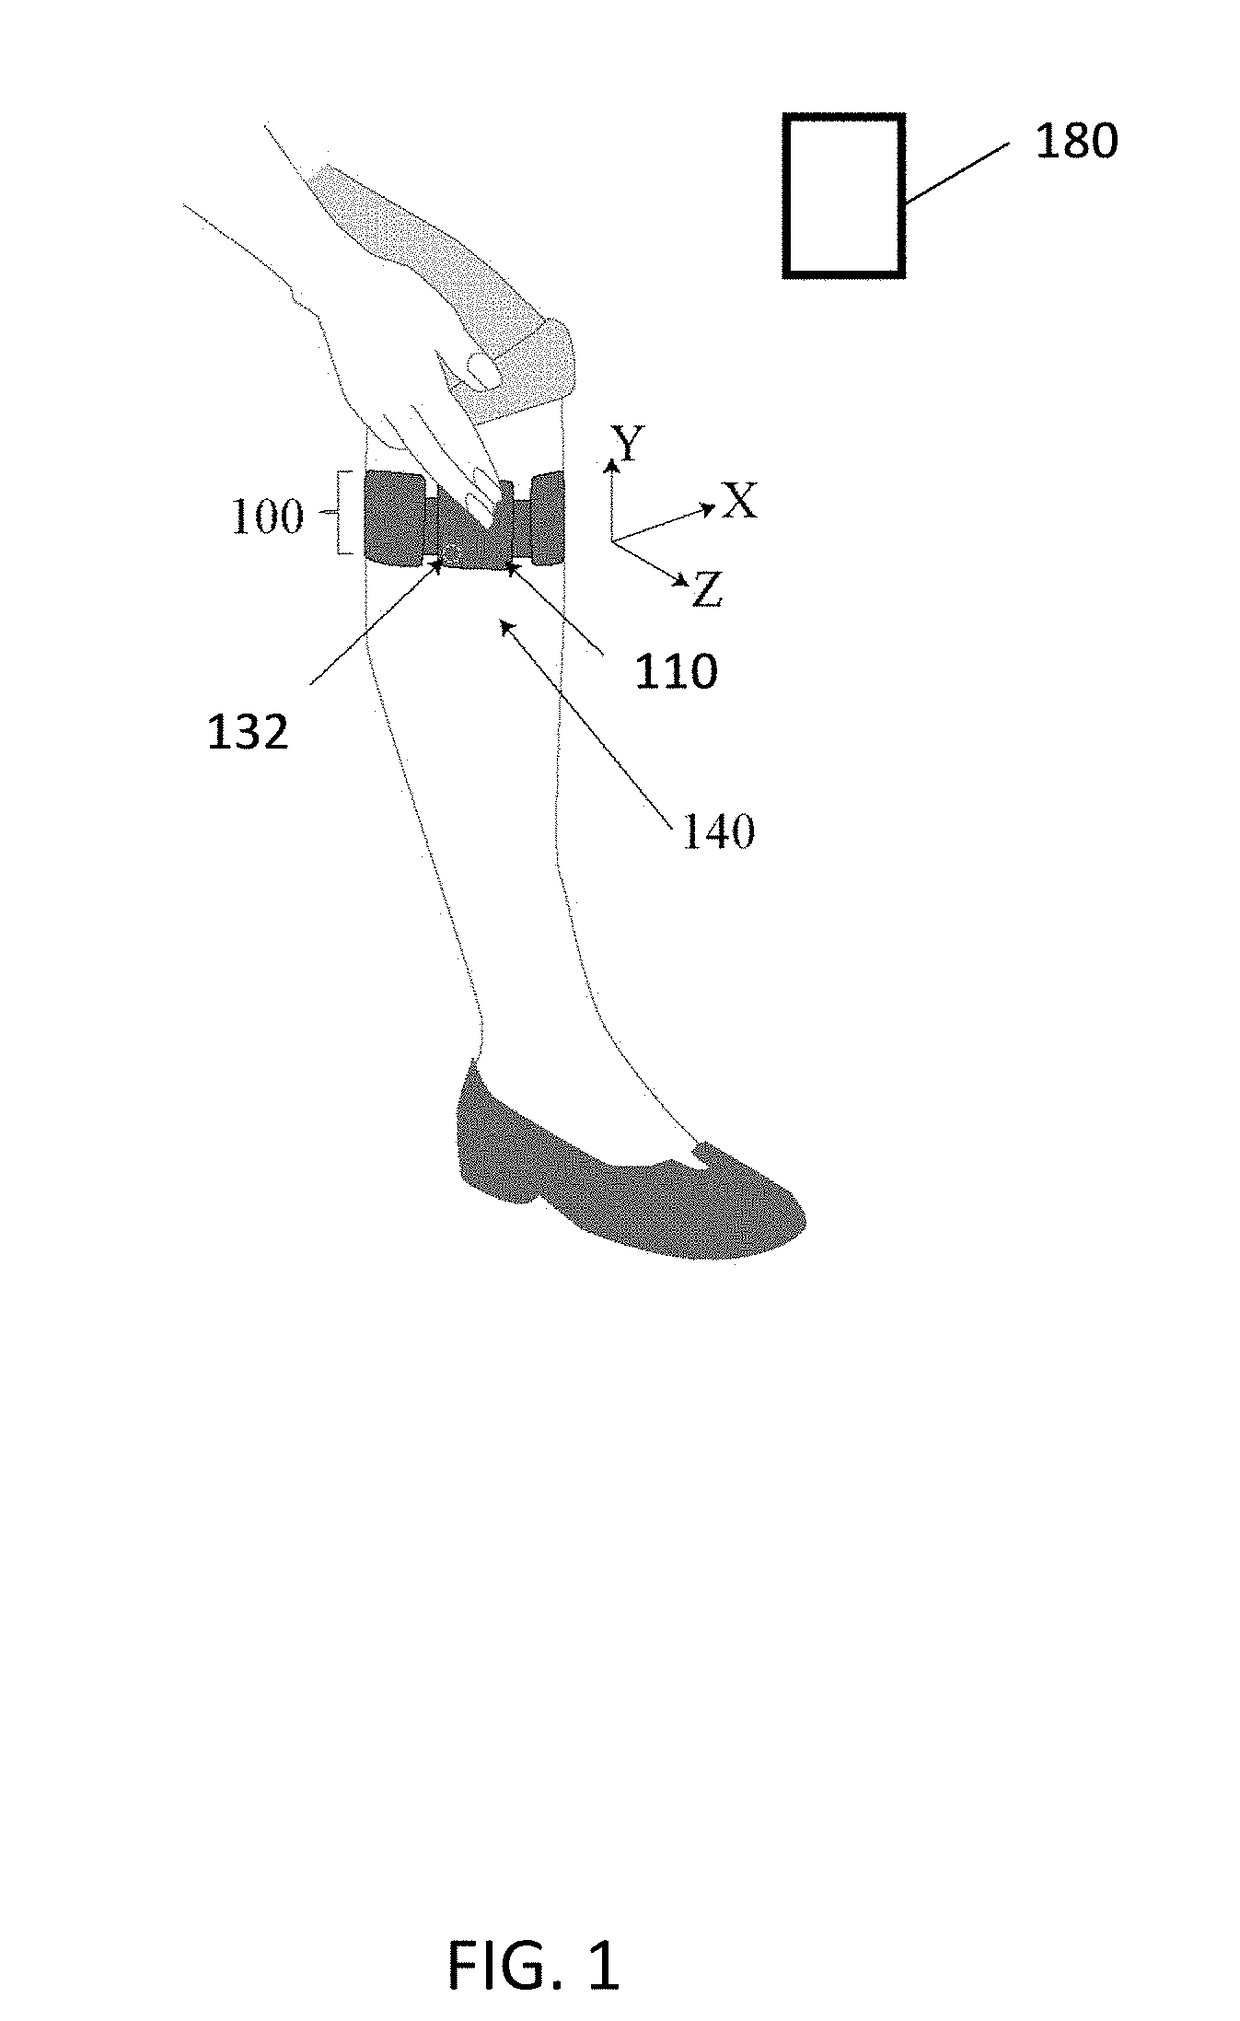 Apparatus and method for button-free control of a wearable transcutaneous electrical nerve stimulator using interactive gestures and other means